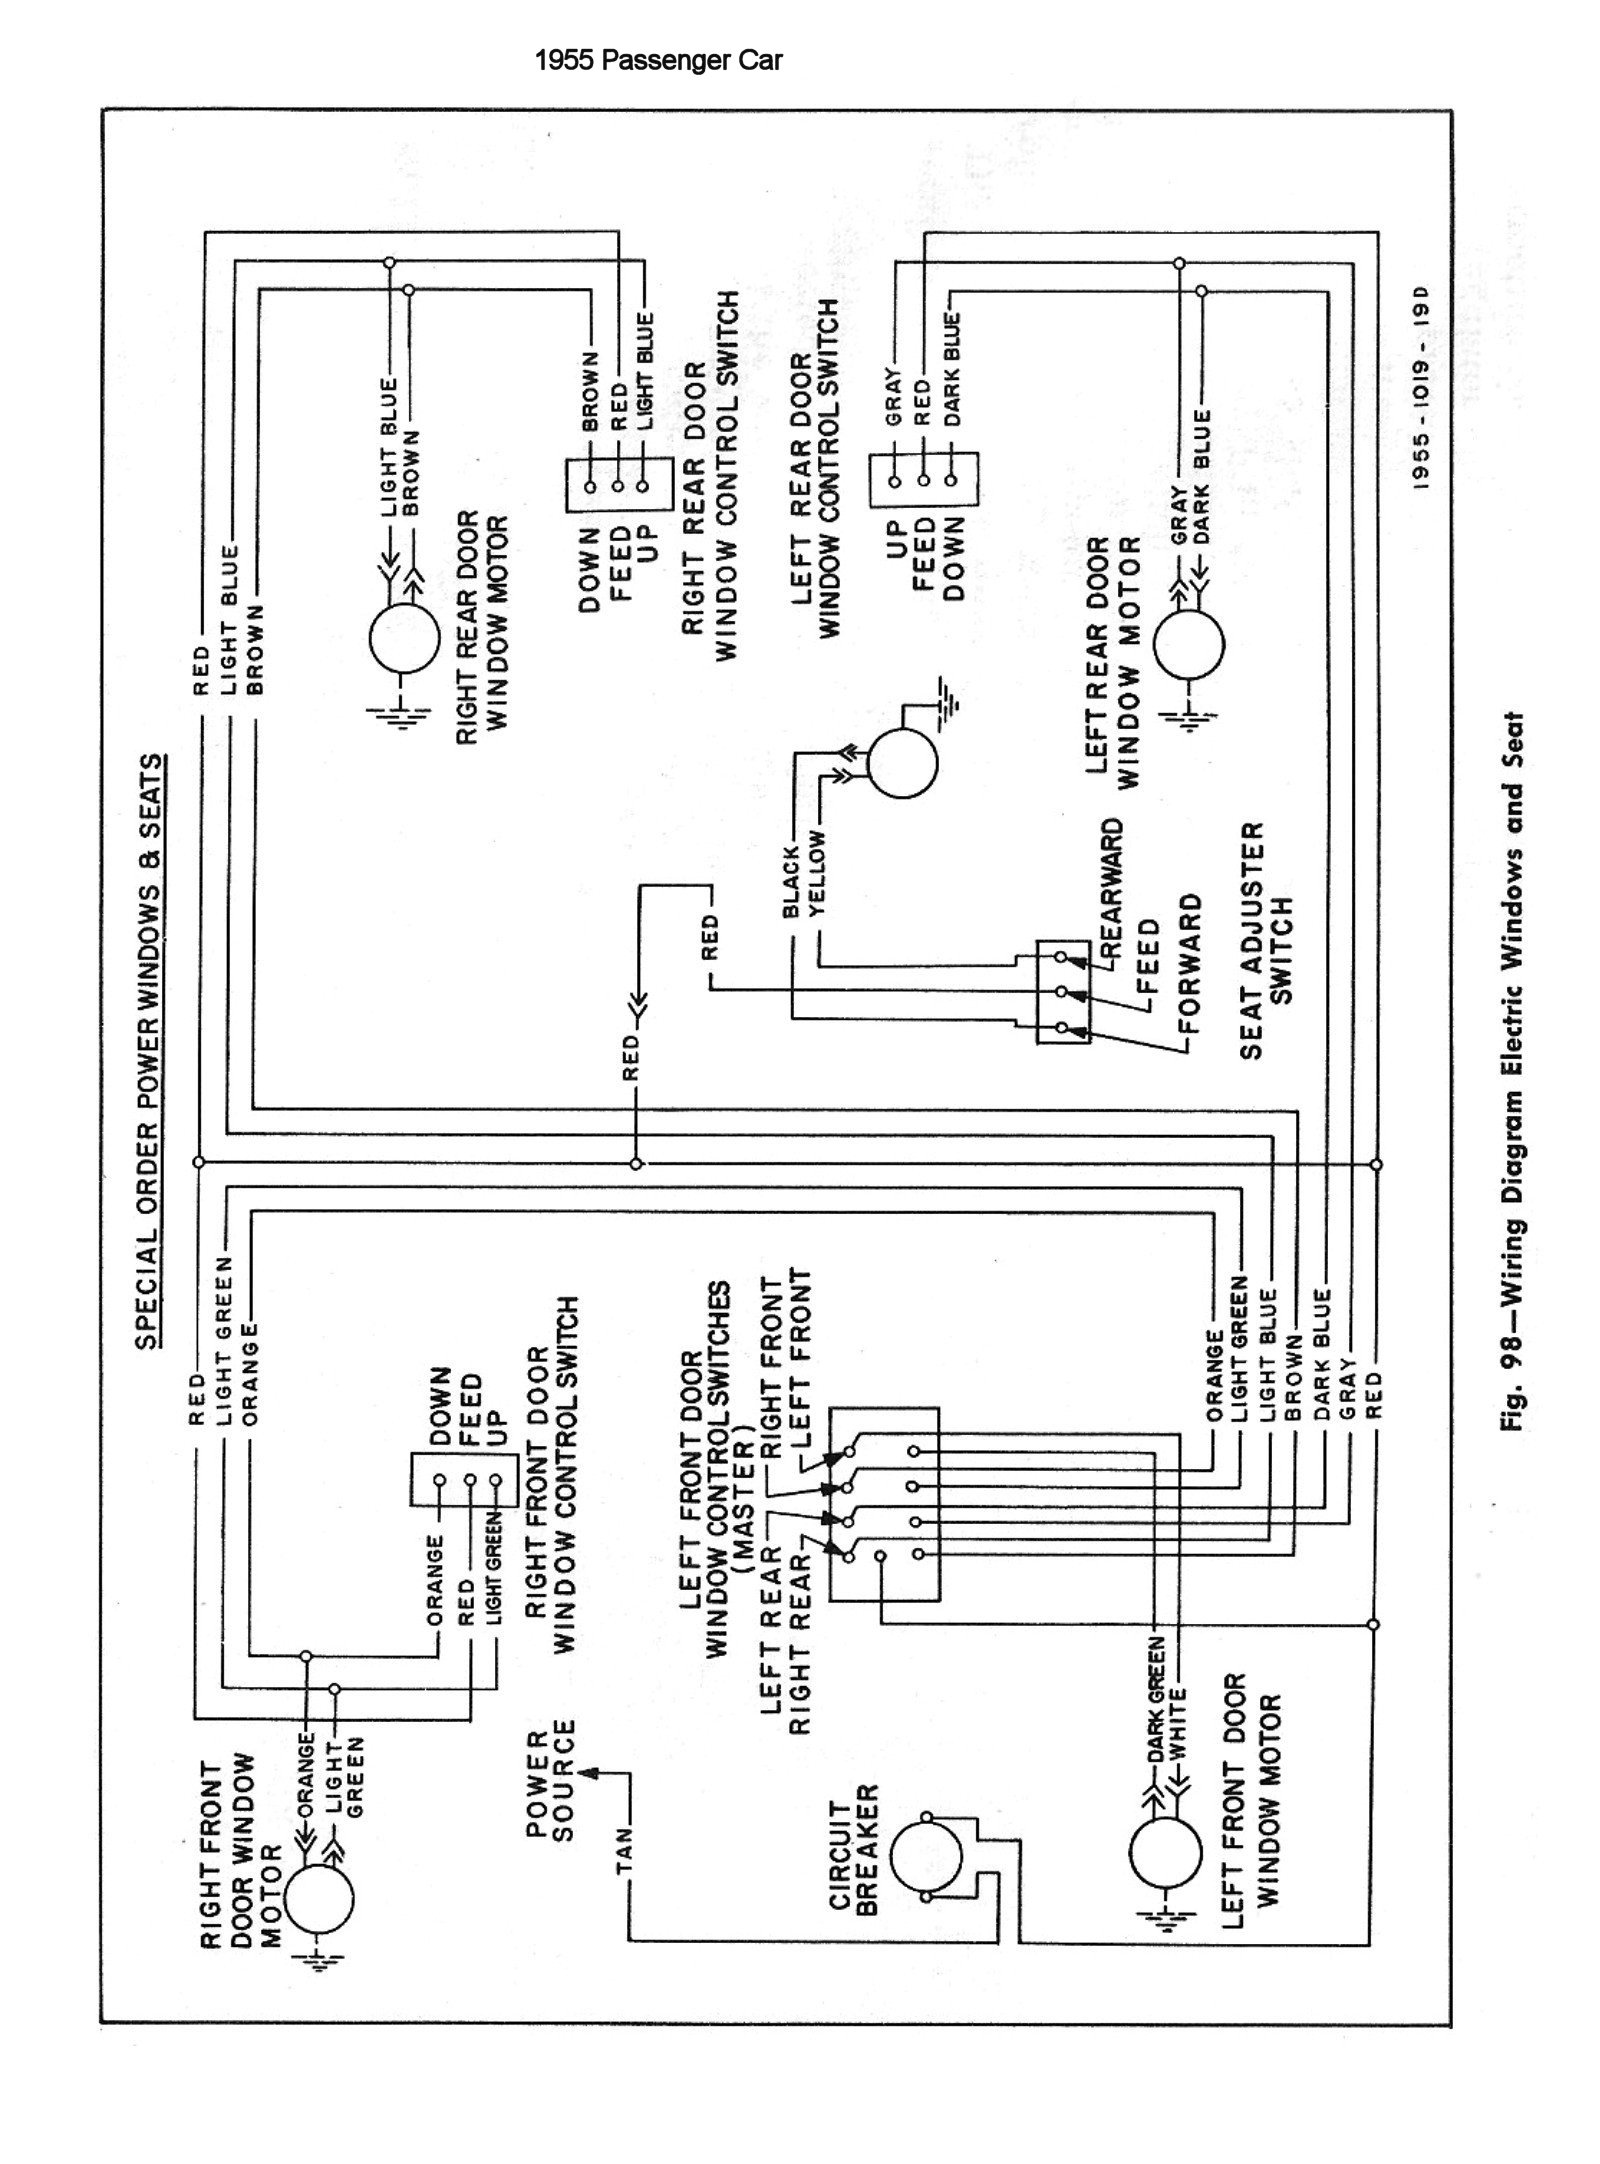 98 Chevy Express Power Window Wiring Diagram from chevy.oldcarmanualproject.com